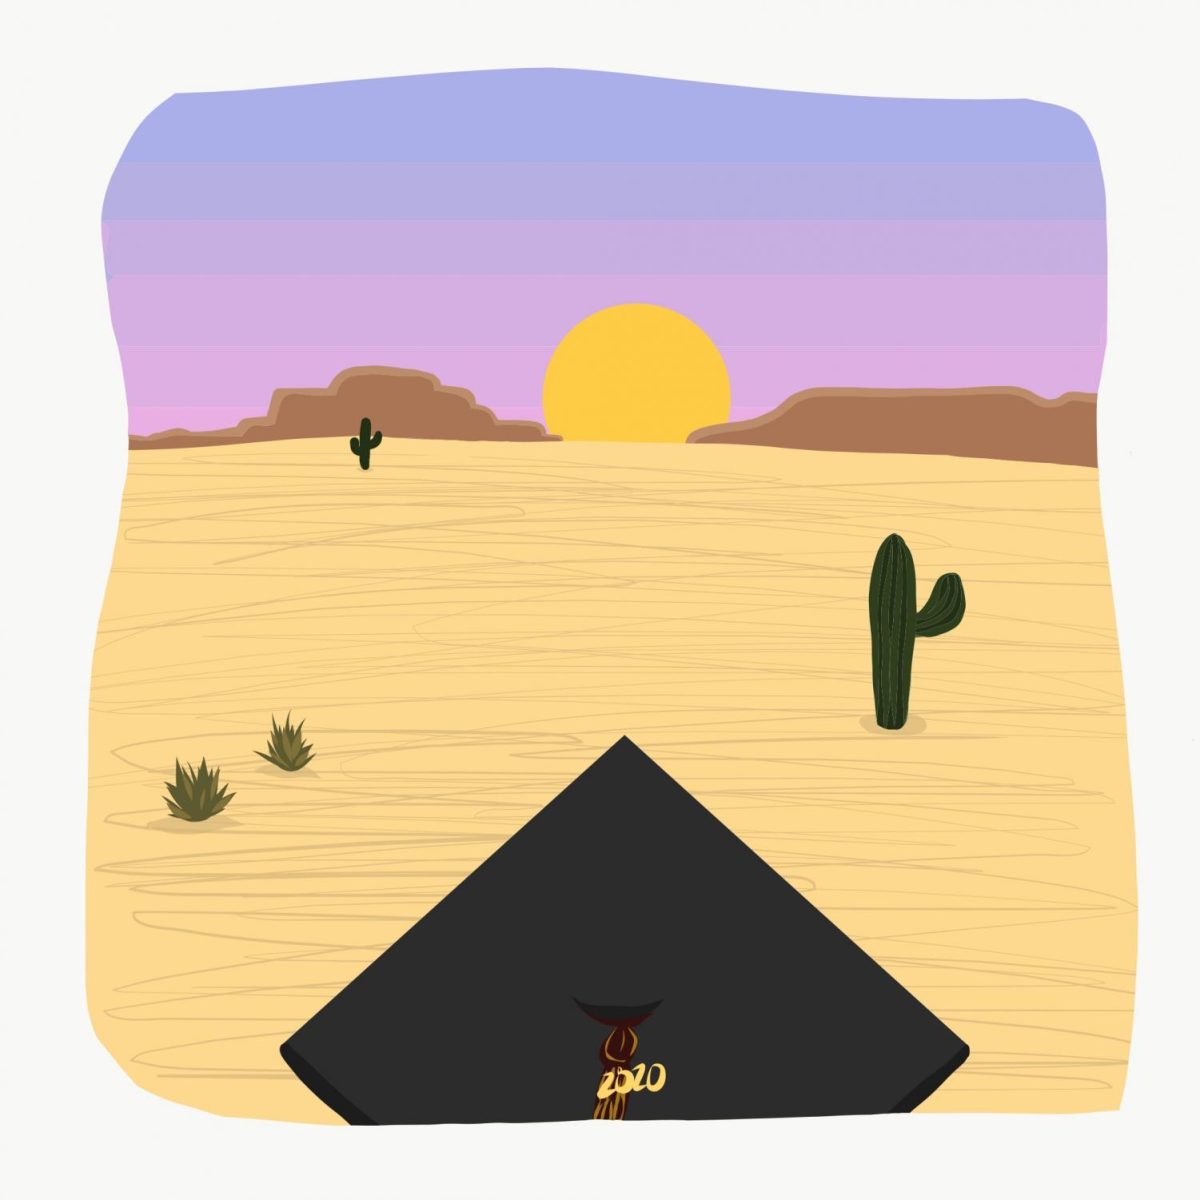 An+illustration+of+a+person+wearing+a+%26%238220%3B2020%26%238221%3B+graduation+cap+looking+out+over+a+desert